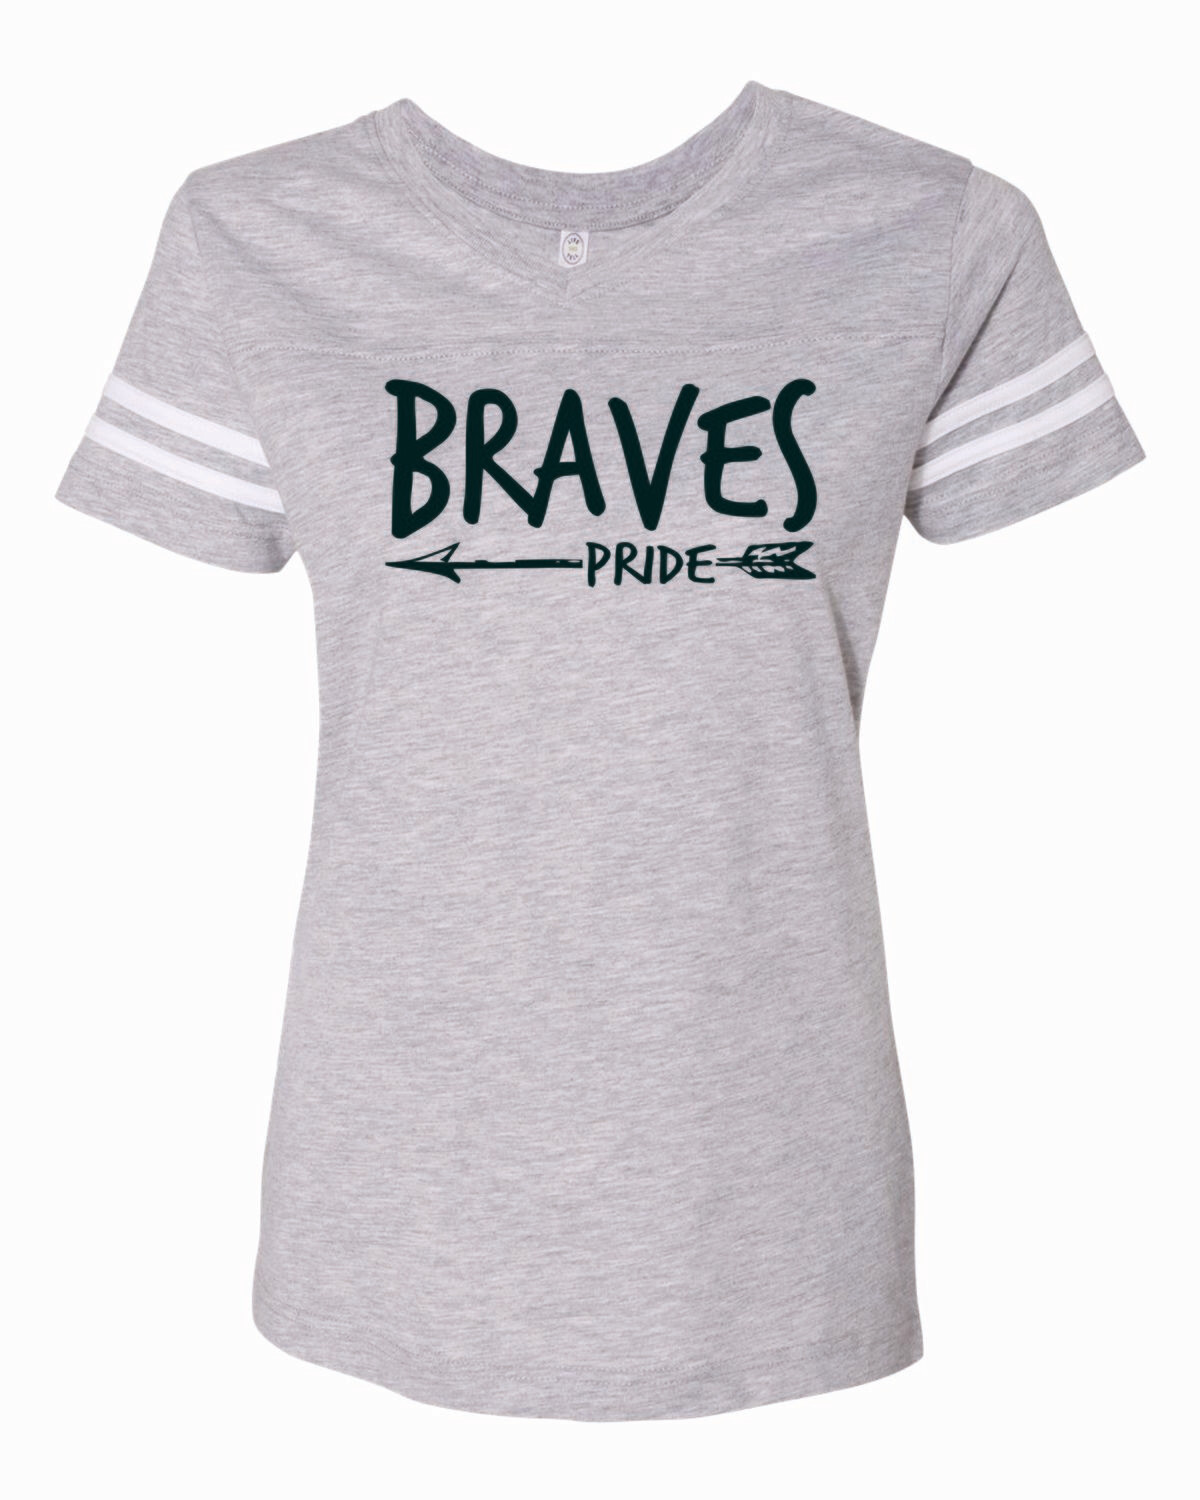 BRAVES PRIDE Women's Football V-Neck Tee, 3 colors available